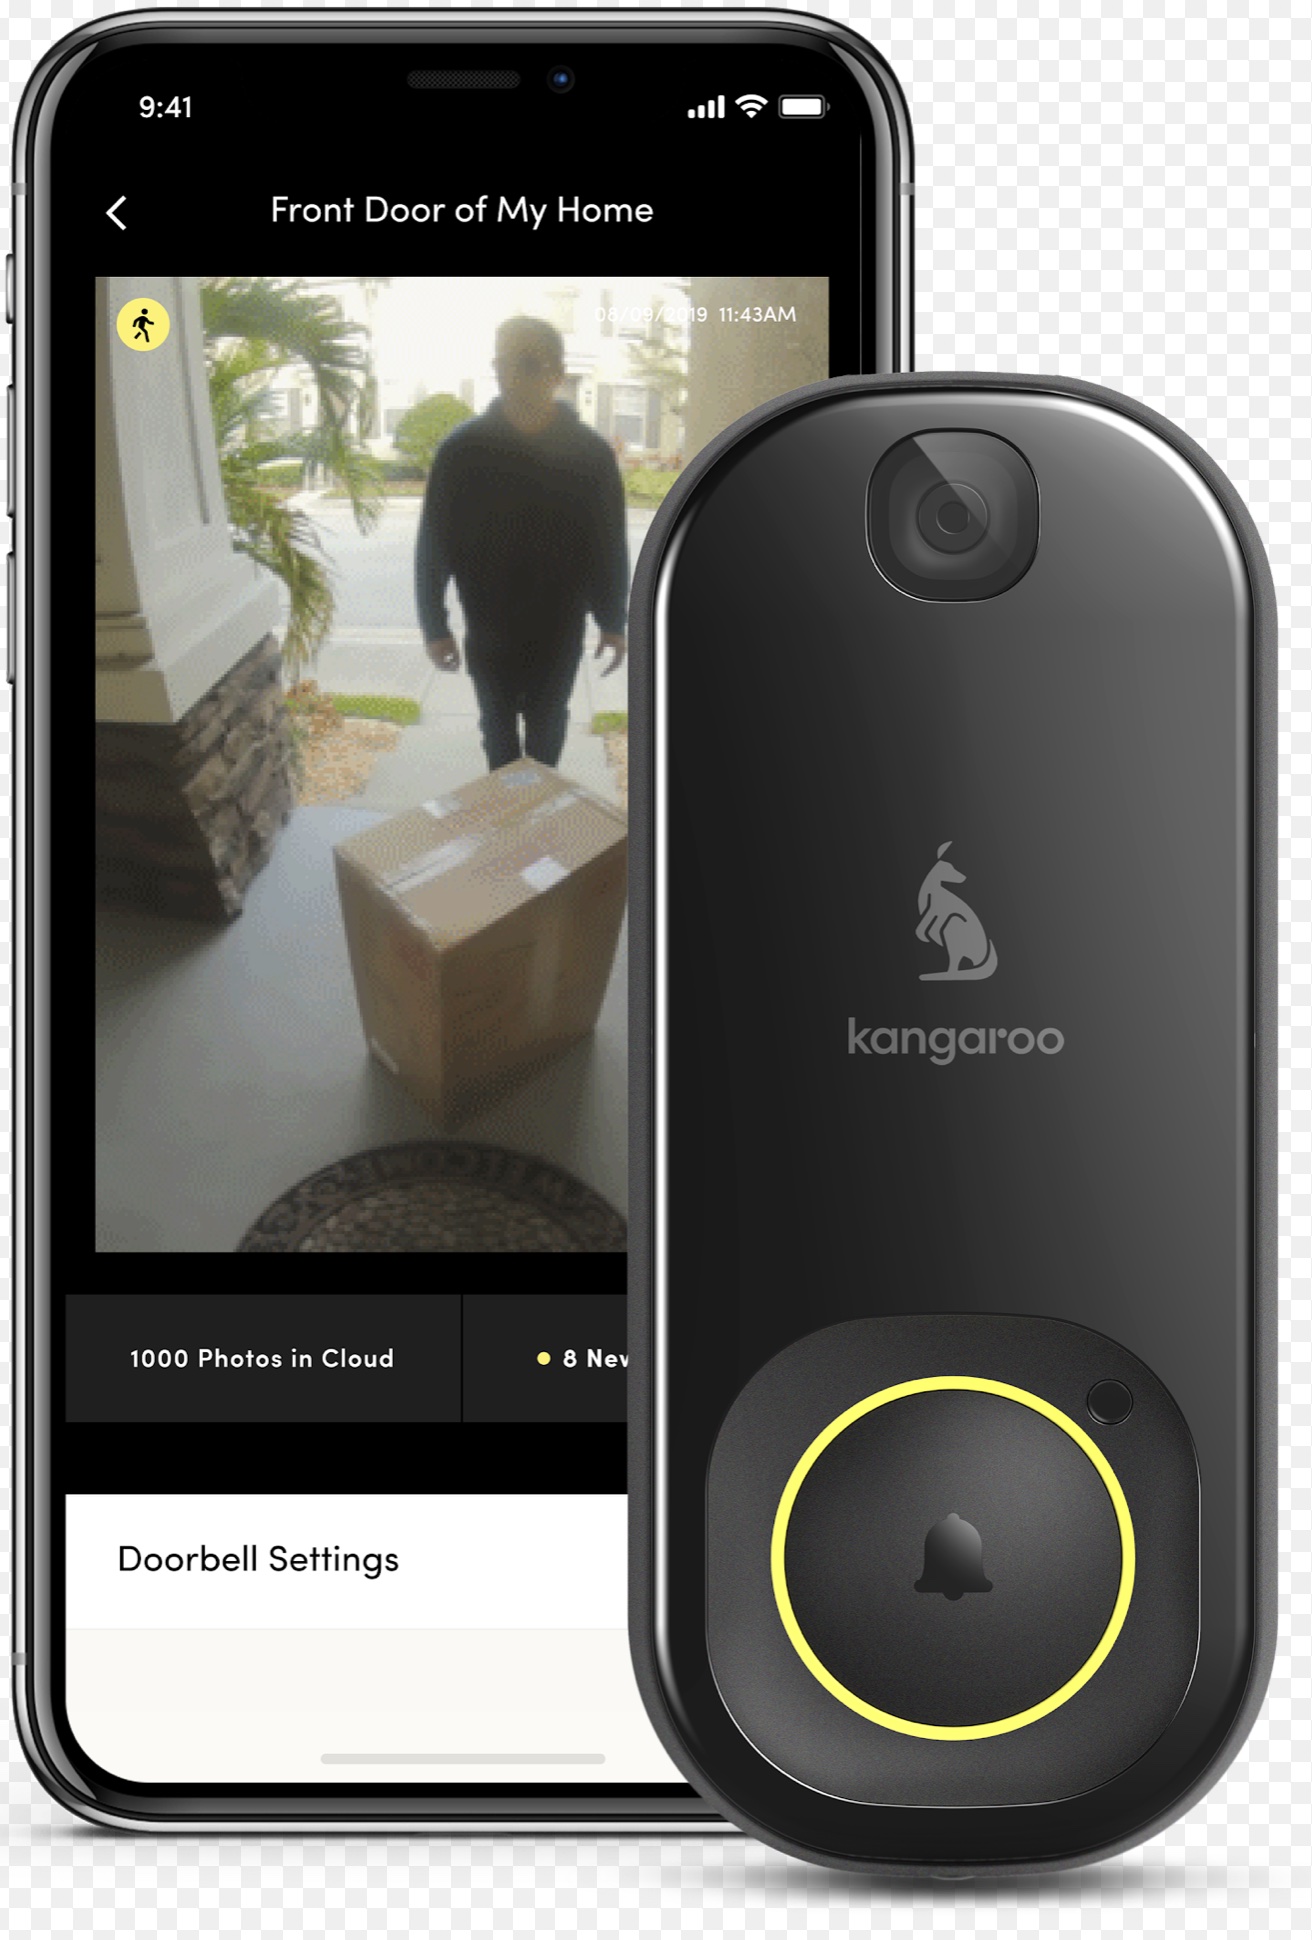 Kangaroo launches Doorbell Camera for home security